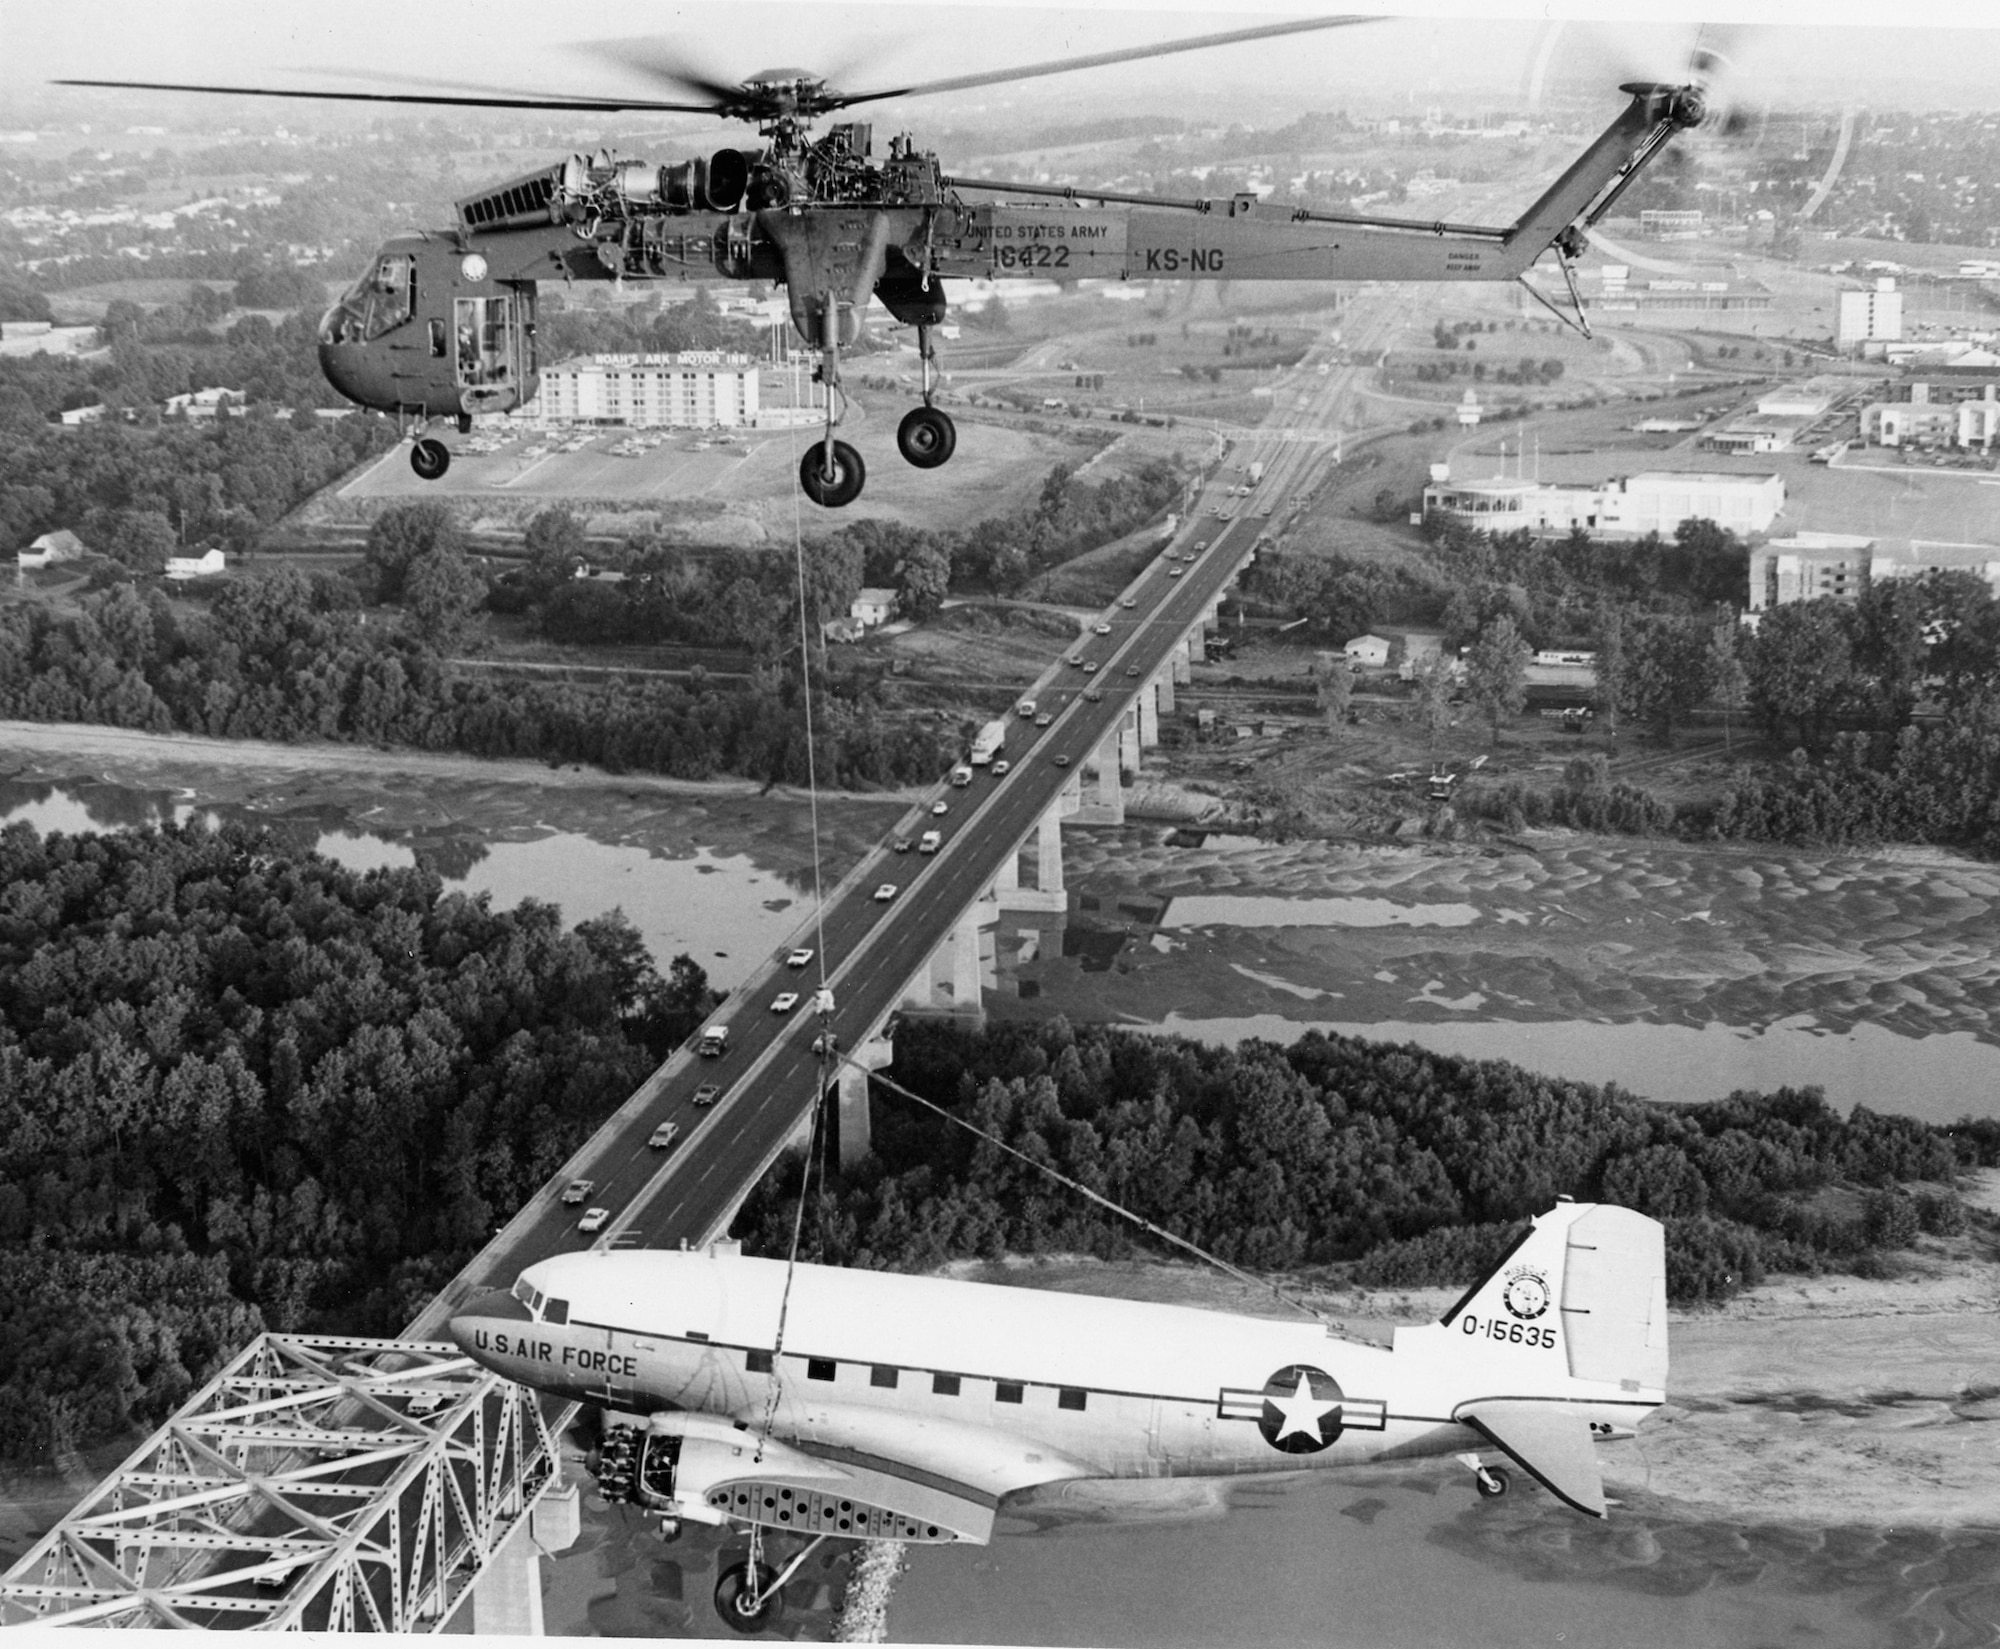 The Missouri Air National Guard’s 131st Tactical Fighter Wing C-47 Gooney Bird on its final flight to the St. Louis Museum of Transportation in St. Louis, Missouri, courtesy of a Kansas Army National Guard CH-54 Sky Crane, July 12, 1974.  (131st Bomb Wing File photo/RELEASED).